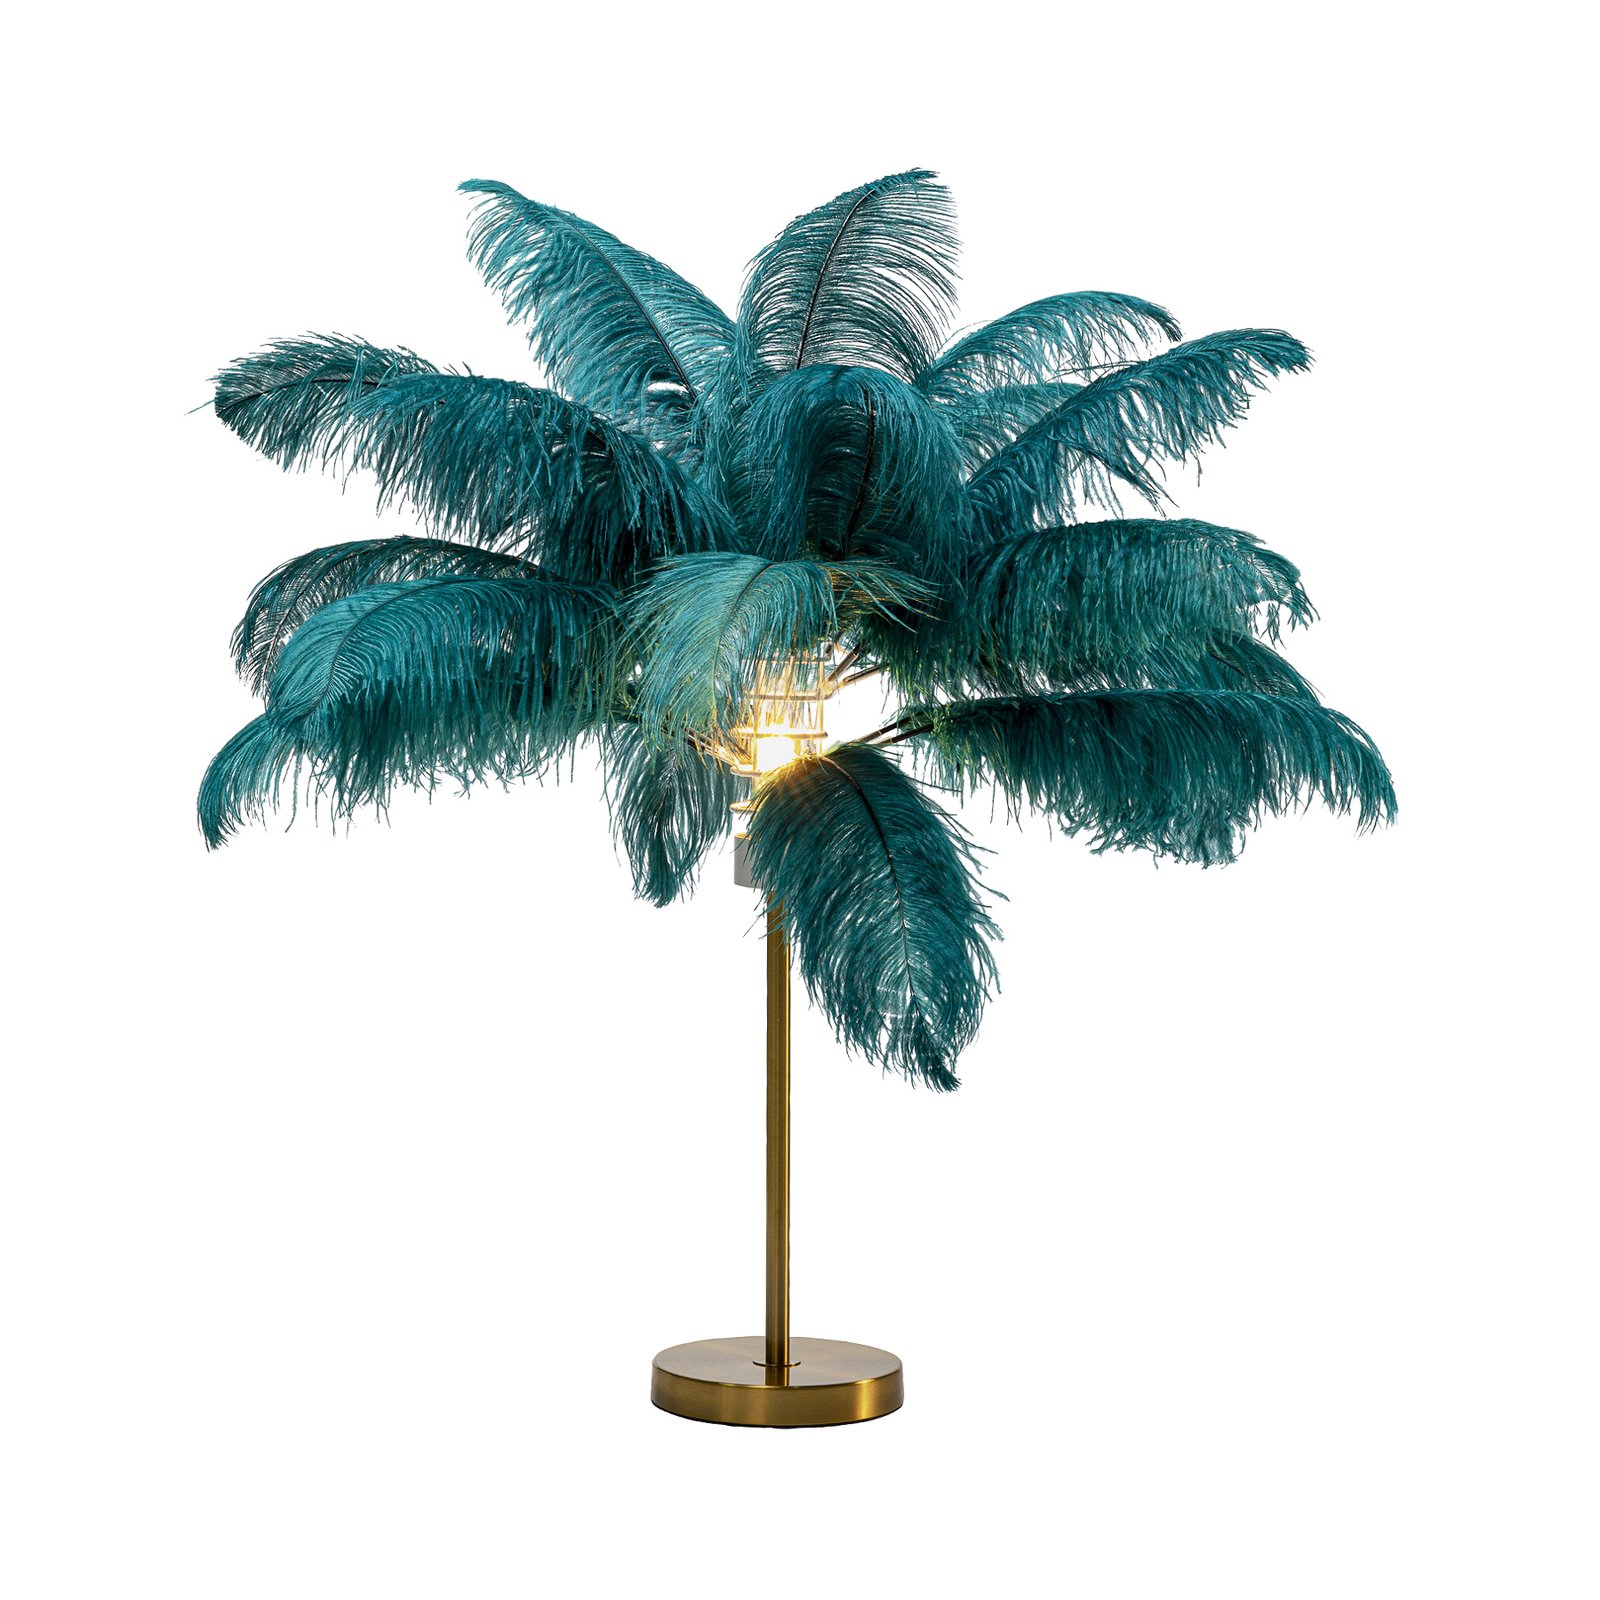 KARE Feather Palm lampe à poser plumes, verte